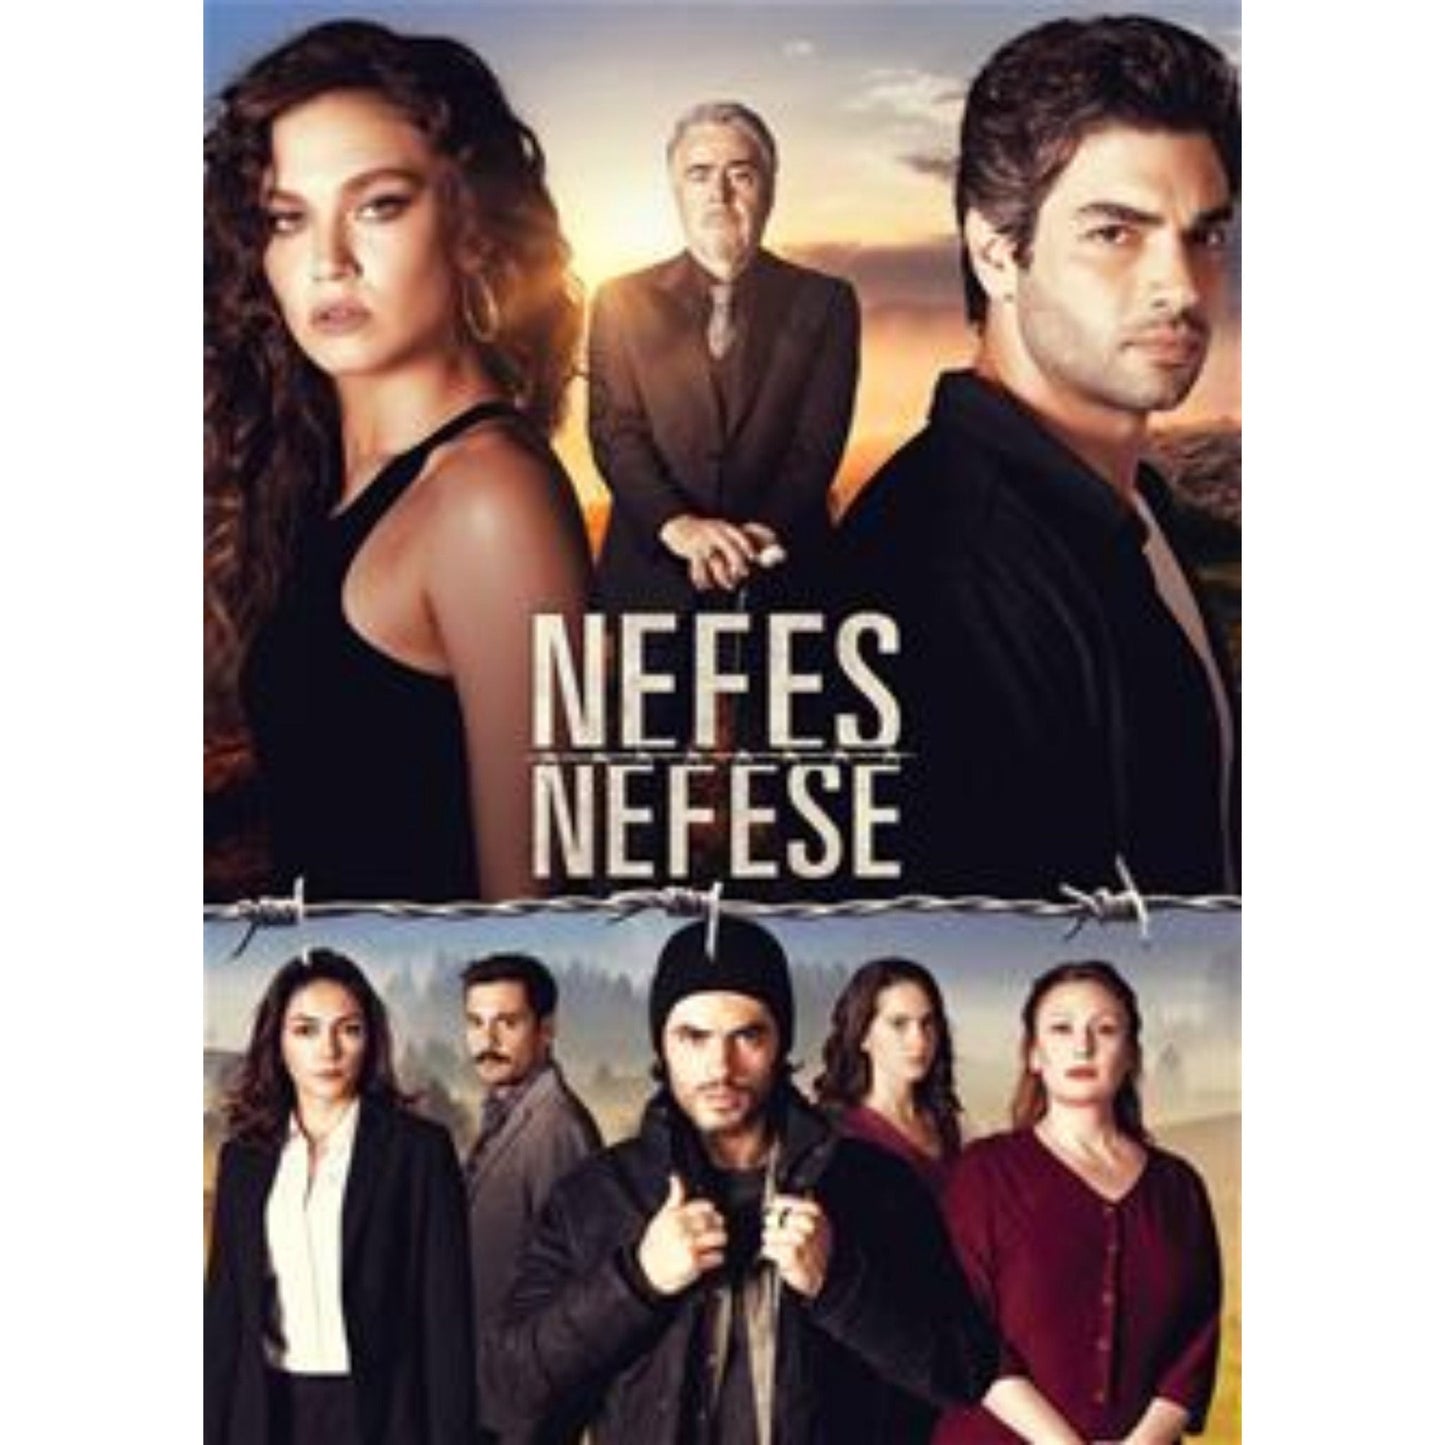 Nefes Nefese Breathless *All 10 Episodes* Original Actor Voices with English Subtitles/ No Ads Turkish Drama Soap Opera Streaming *Full Hd* - Turkish TV Series